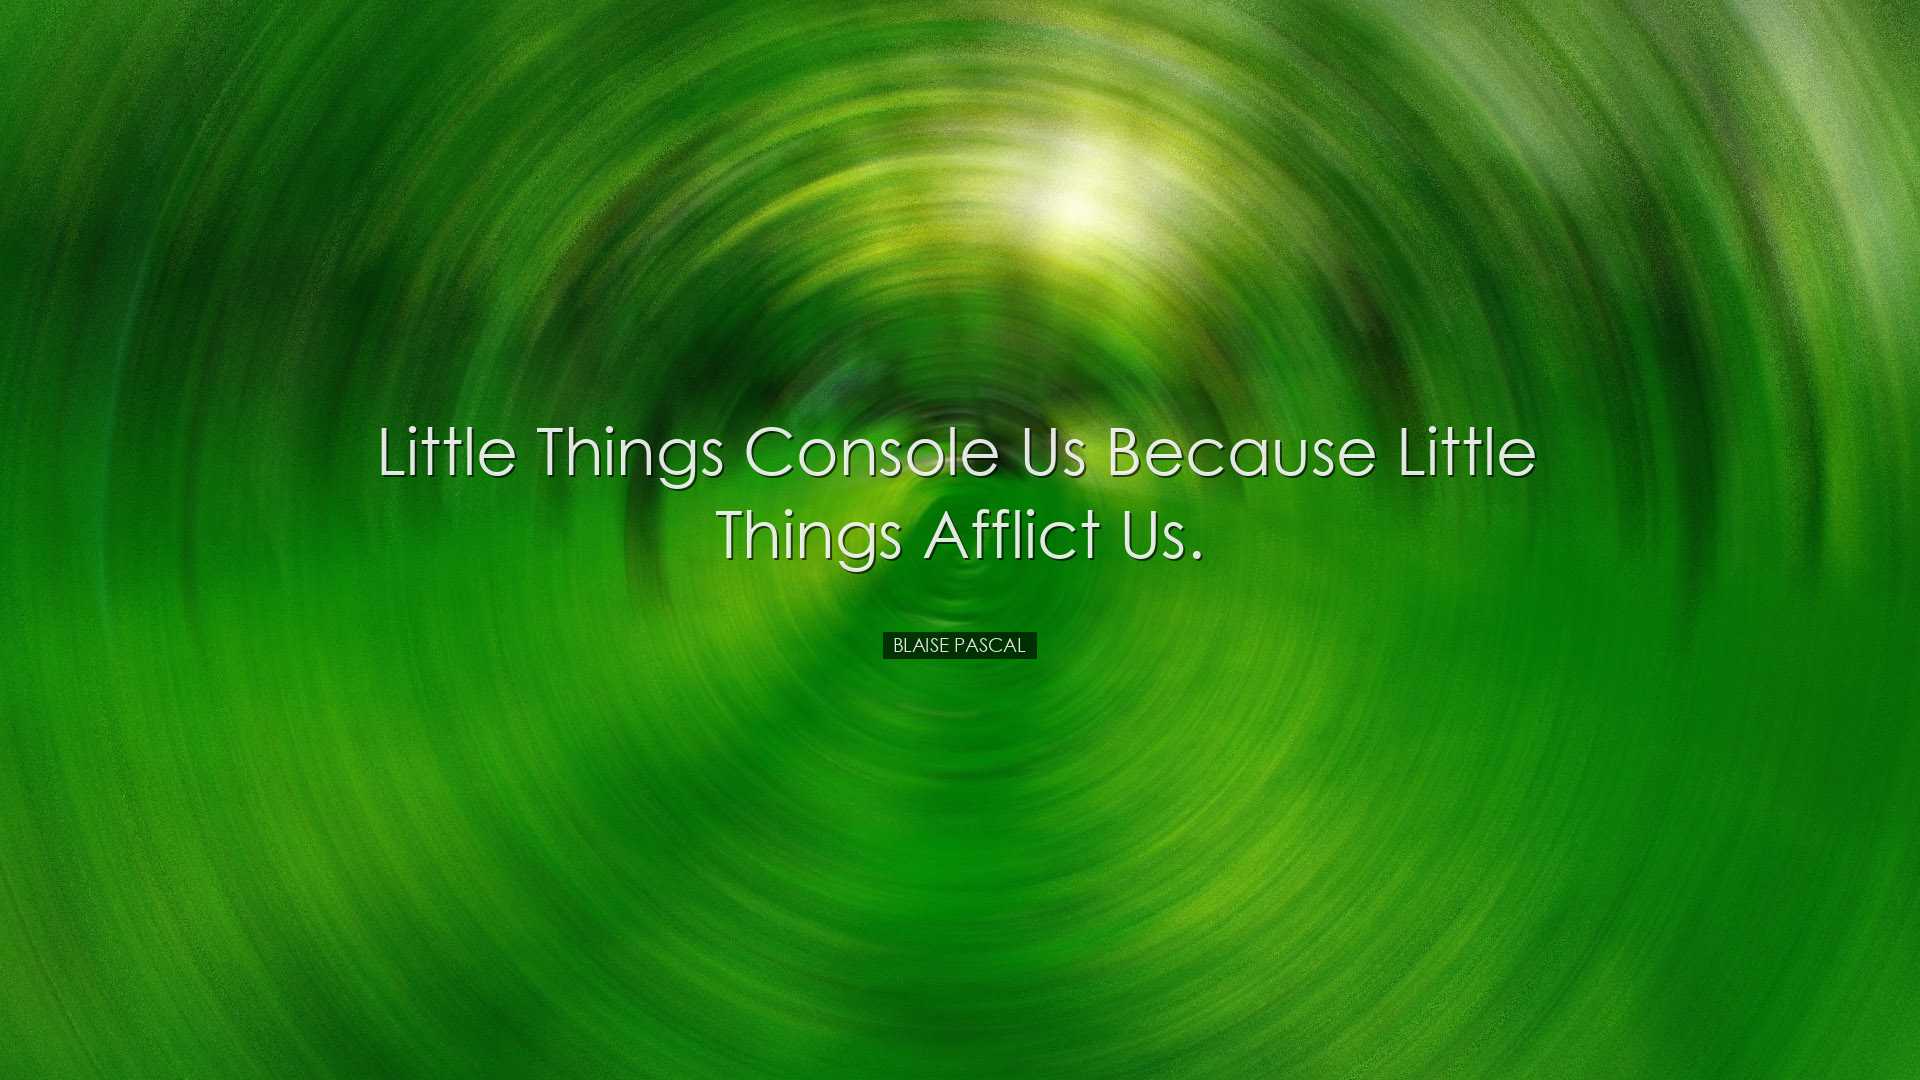 Little things console us because little things afflict us. - Blais